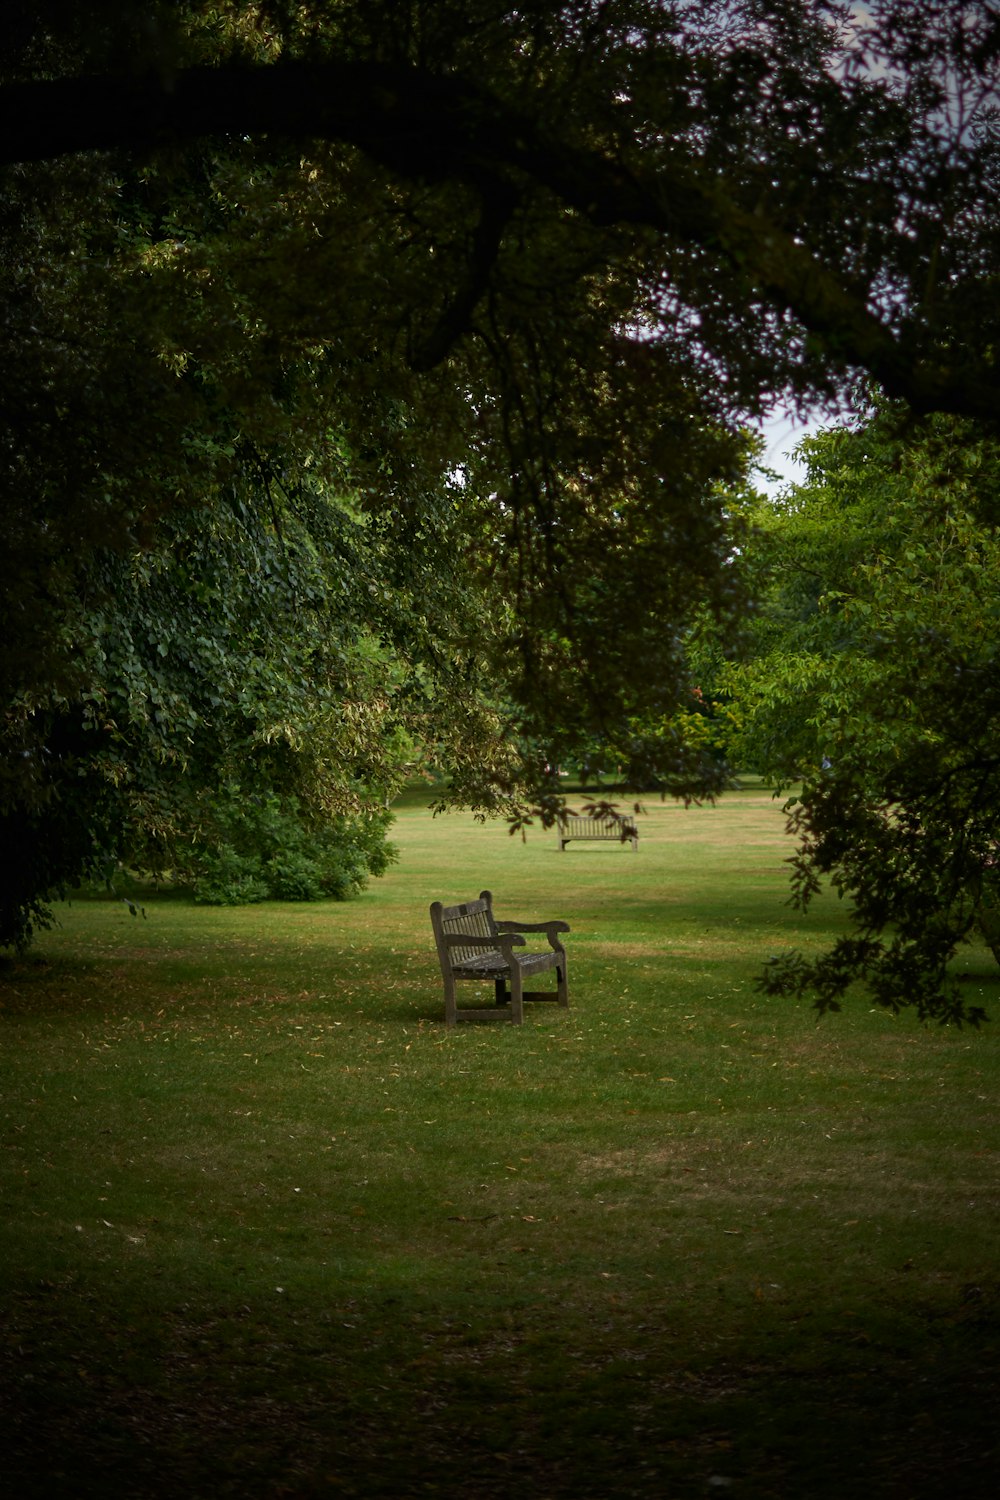 brown wooden bench on green grass field surrounded by green trees during daytime